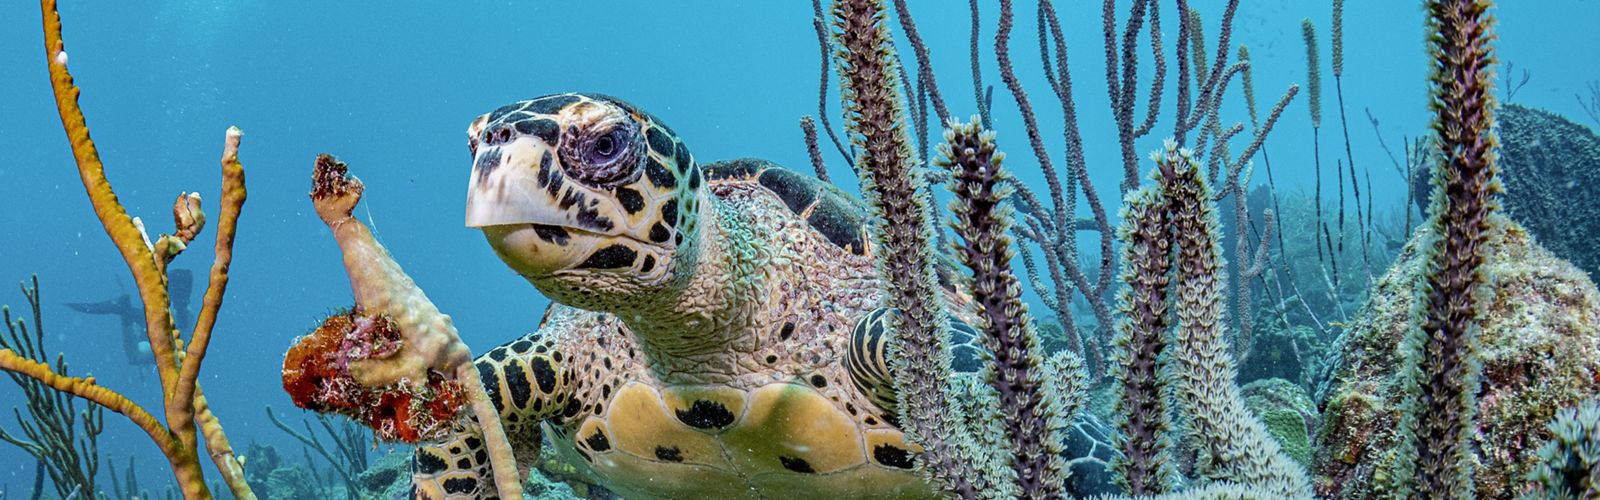 sea turtle underwater among coral.